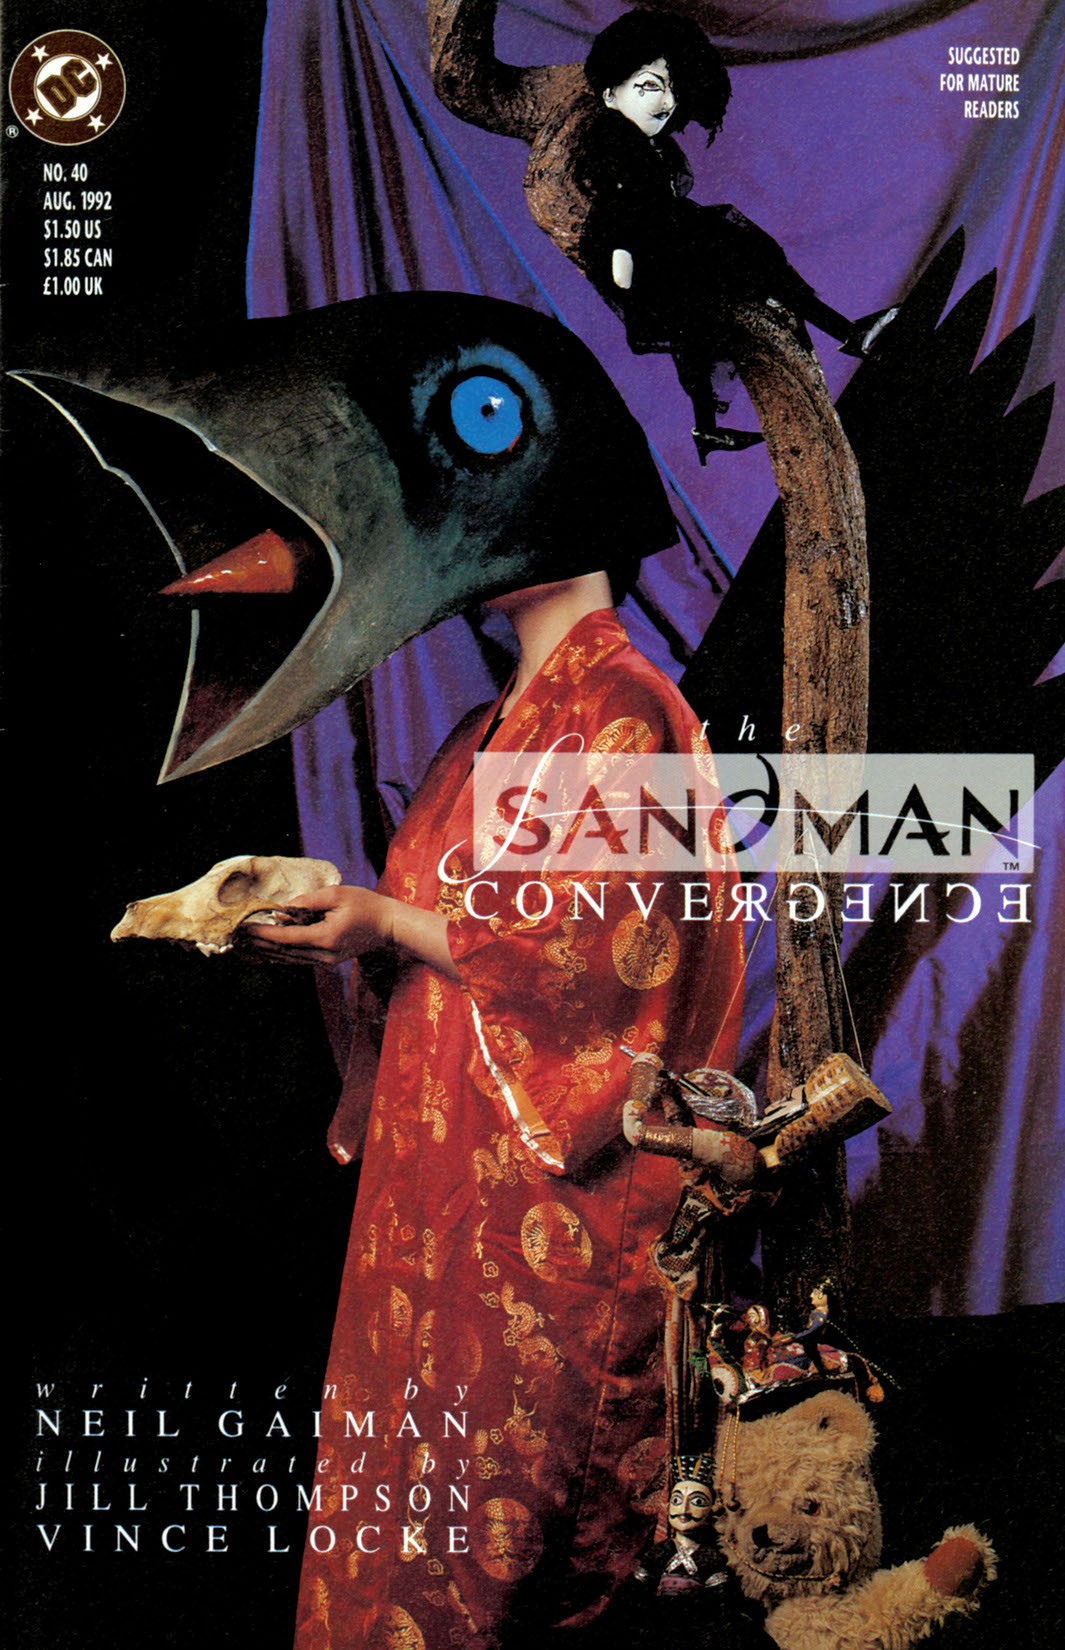 The Sandman #40 preview images